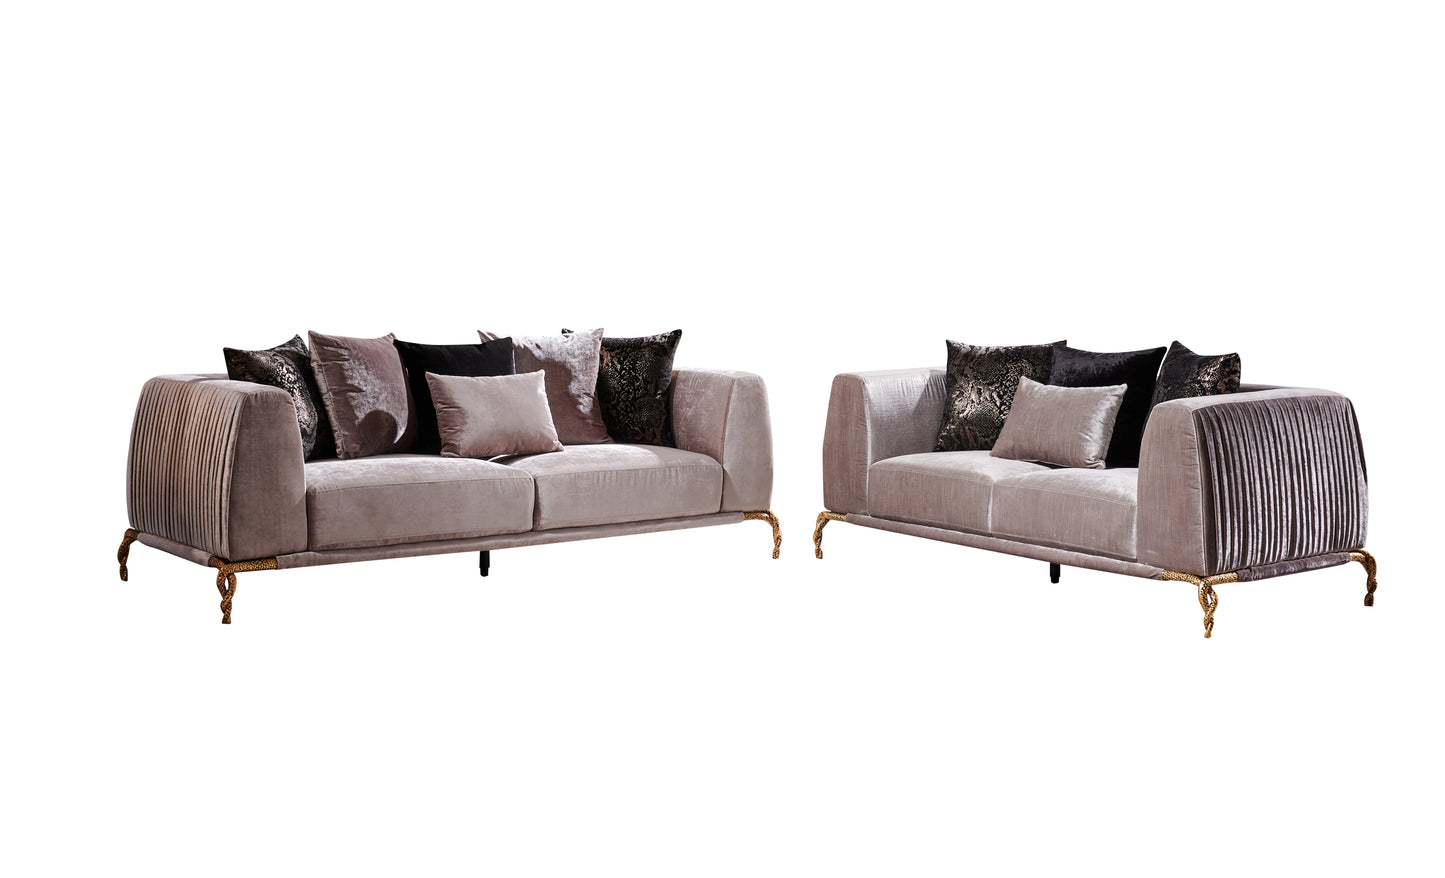 Majestic Shiny Thick Velvet Fabric Upholstered 3PC Living room set Made With Wood Finished in Ivory